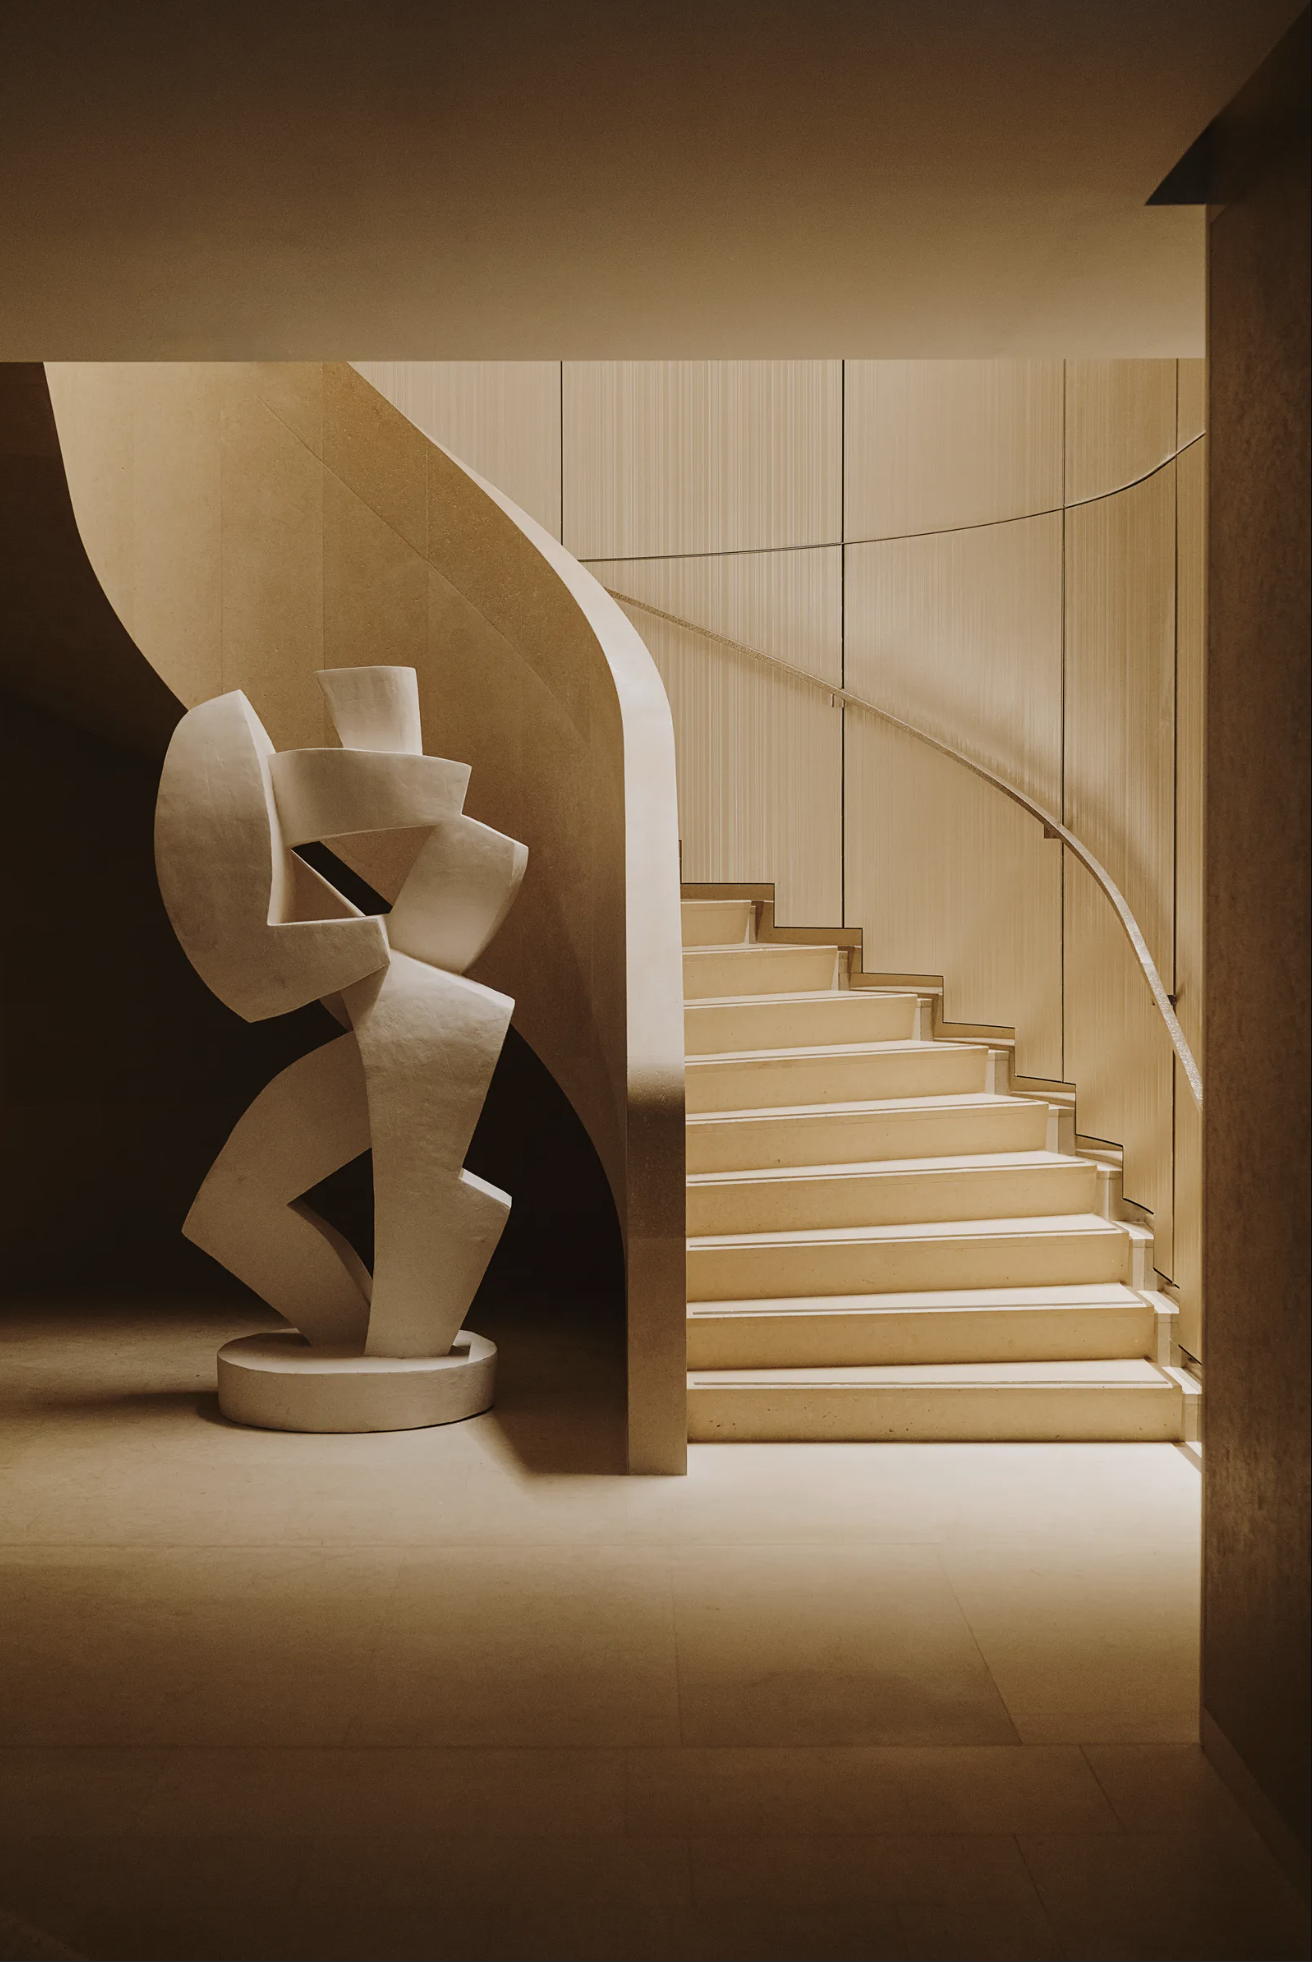 The Dior spa’s limestone stair and Florian Tomballe sculpture at Cheval Blanc